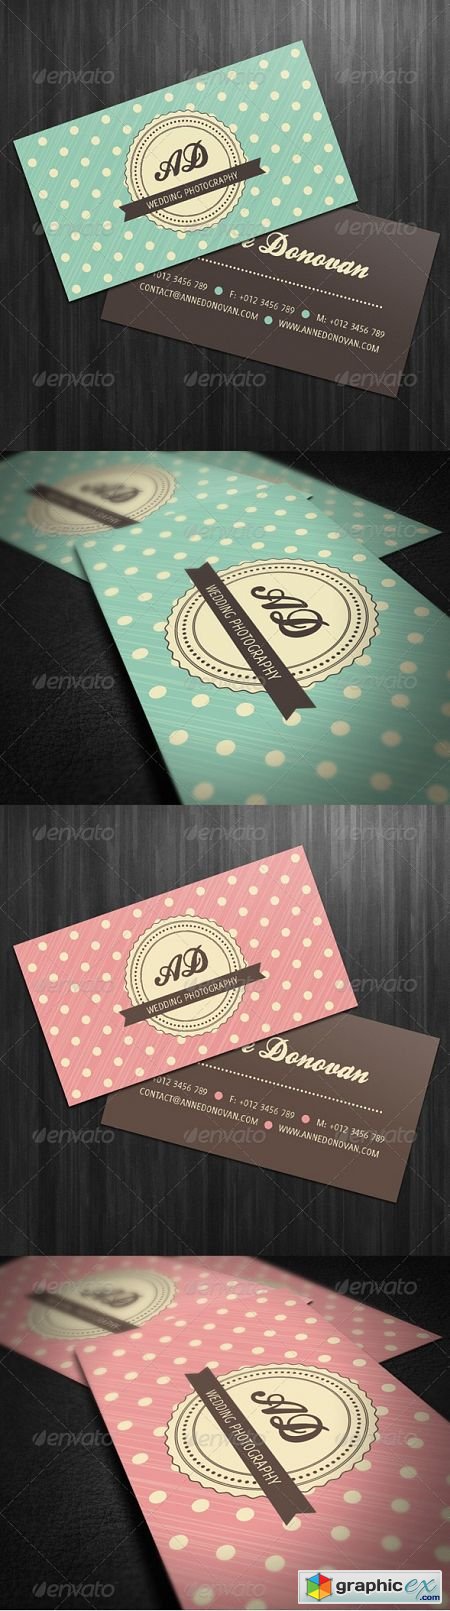 Retro Business Card (4 Color Variations) 3554621